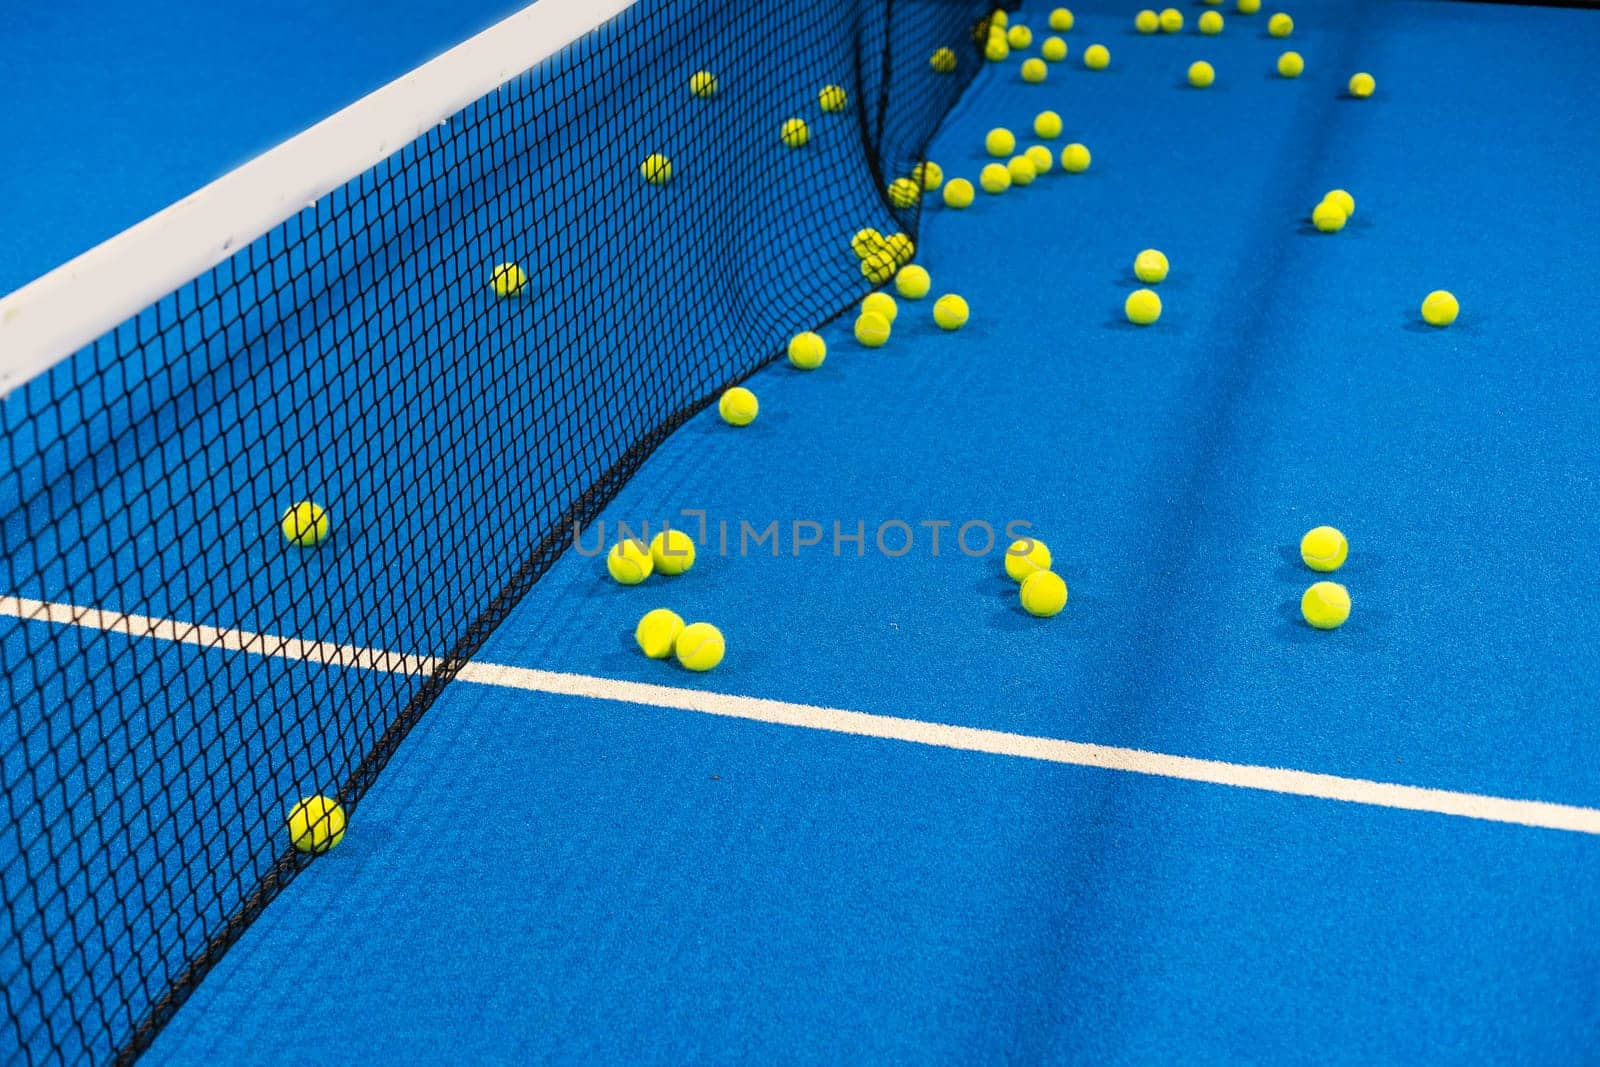 Tennis balls fall over on the tennis playground. High quality photo